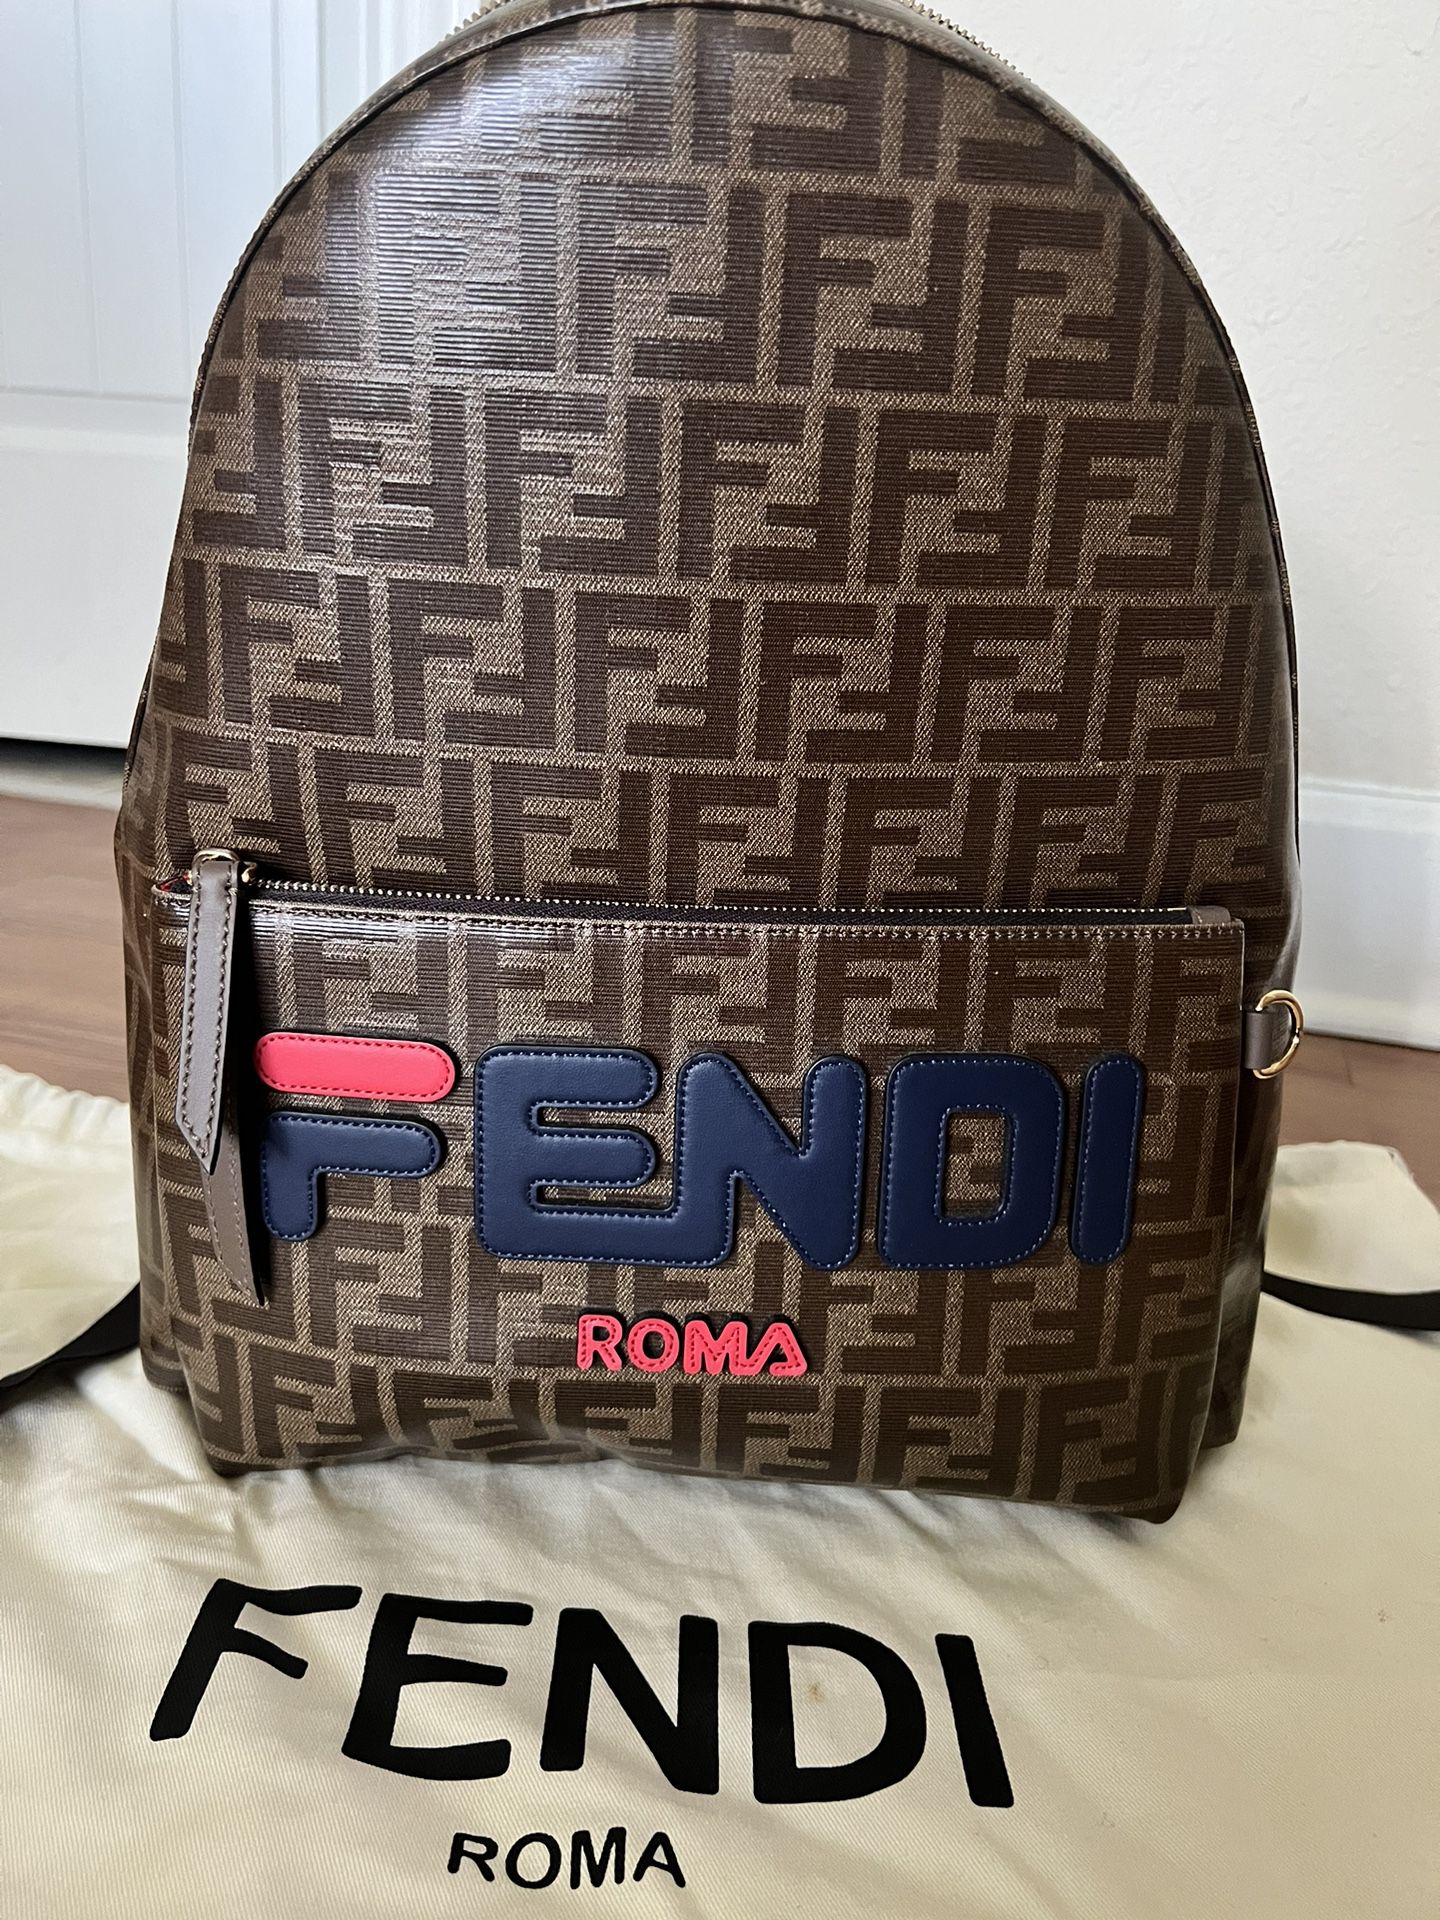 FENDI Zucca Fendimania Canvas Backpack With Dust bag 100% Authentic With Serial NR.  NEW Gucci